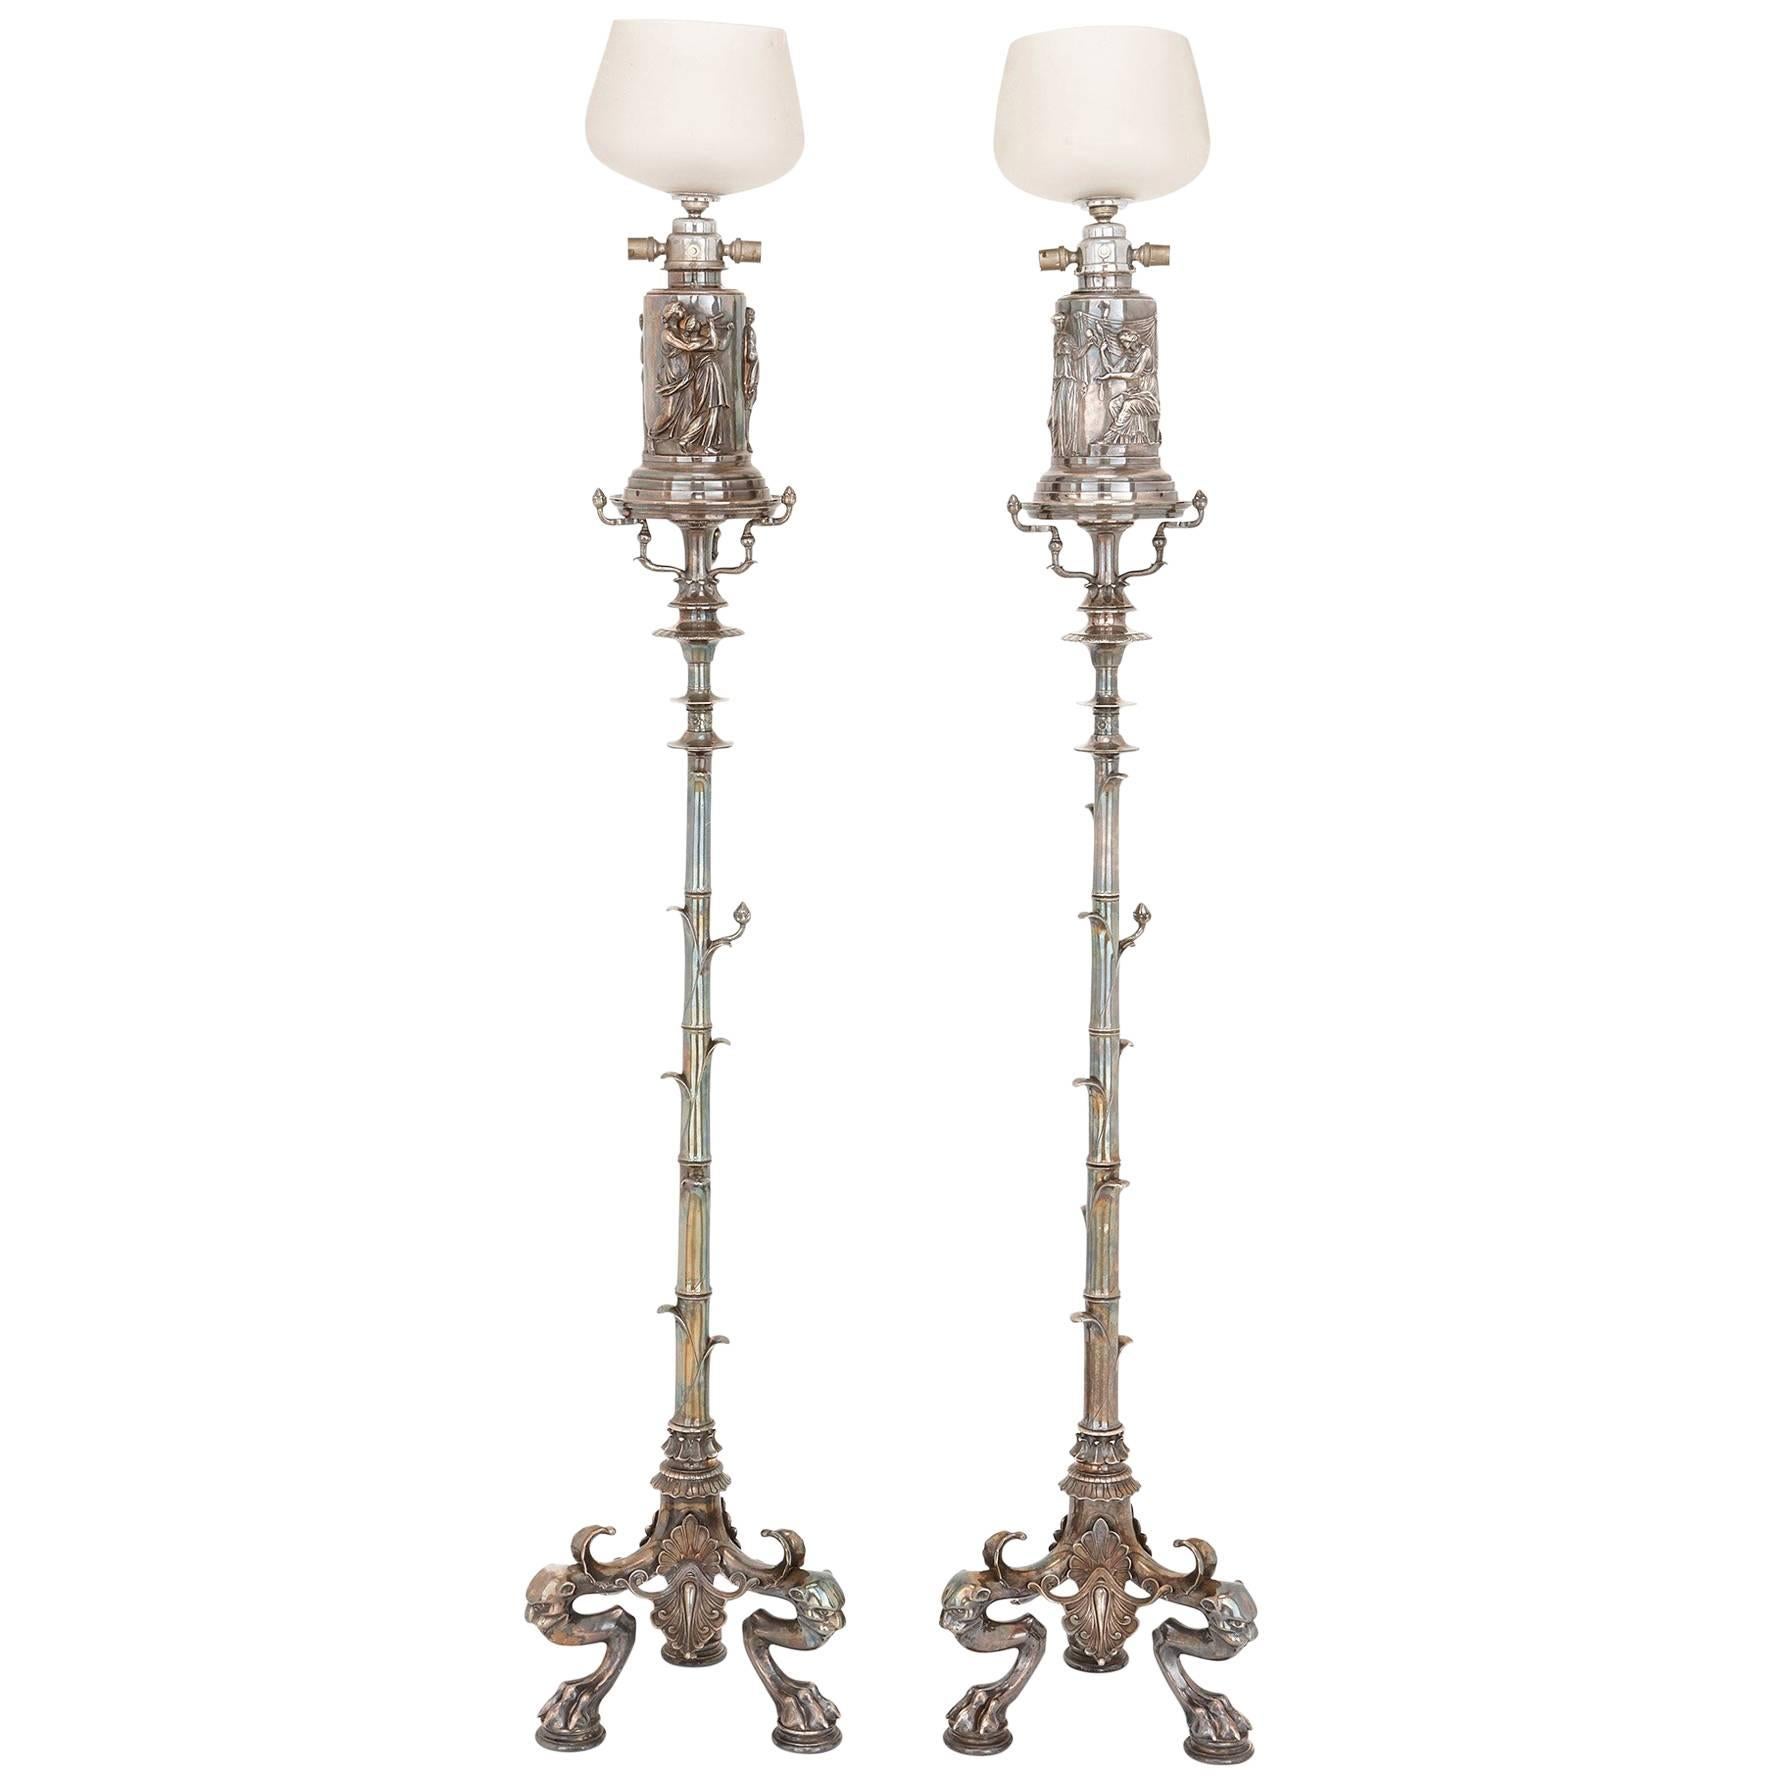 Pair of Silvered Bronze Large Antique Floor Lamps, Attributed to Barbedienne